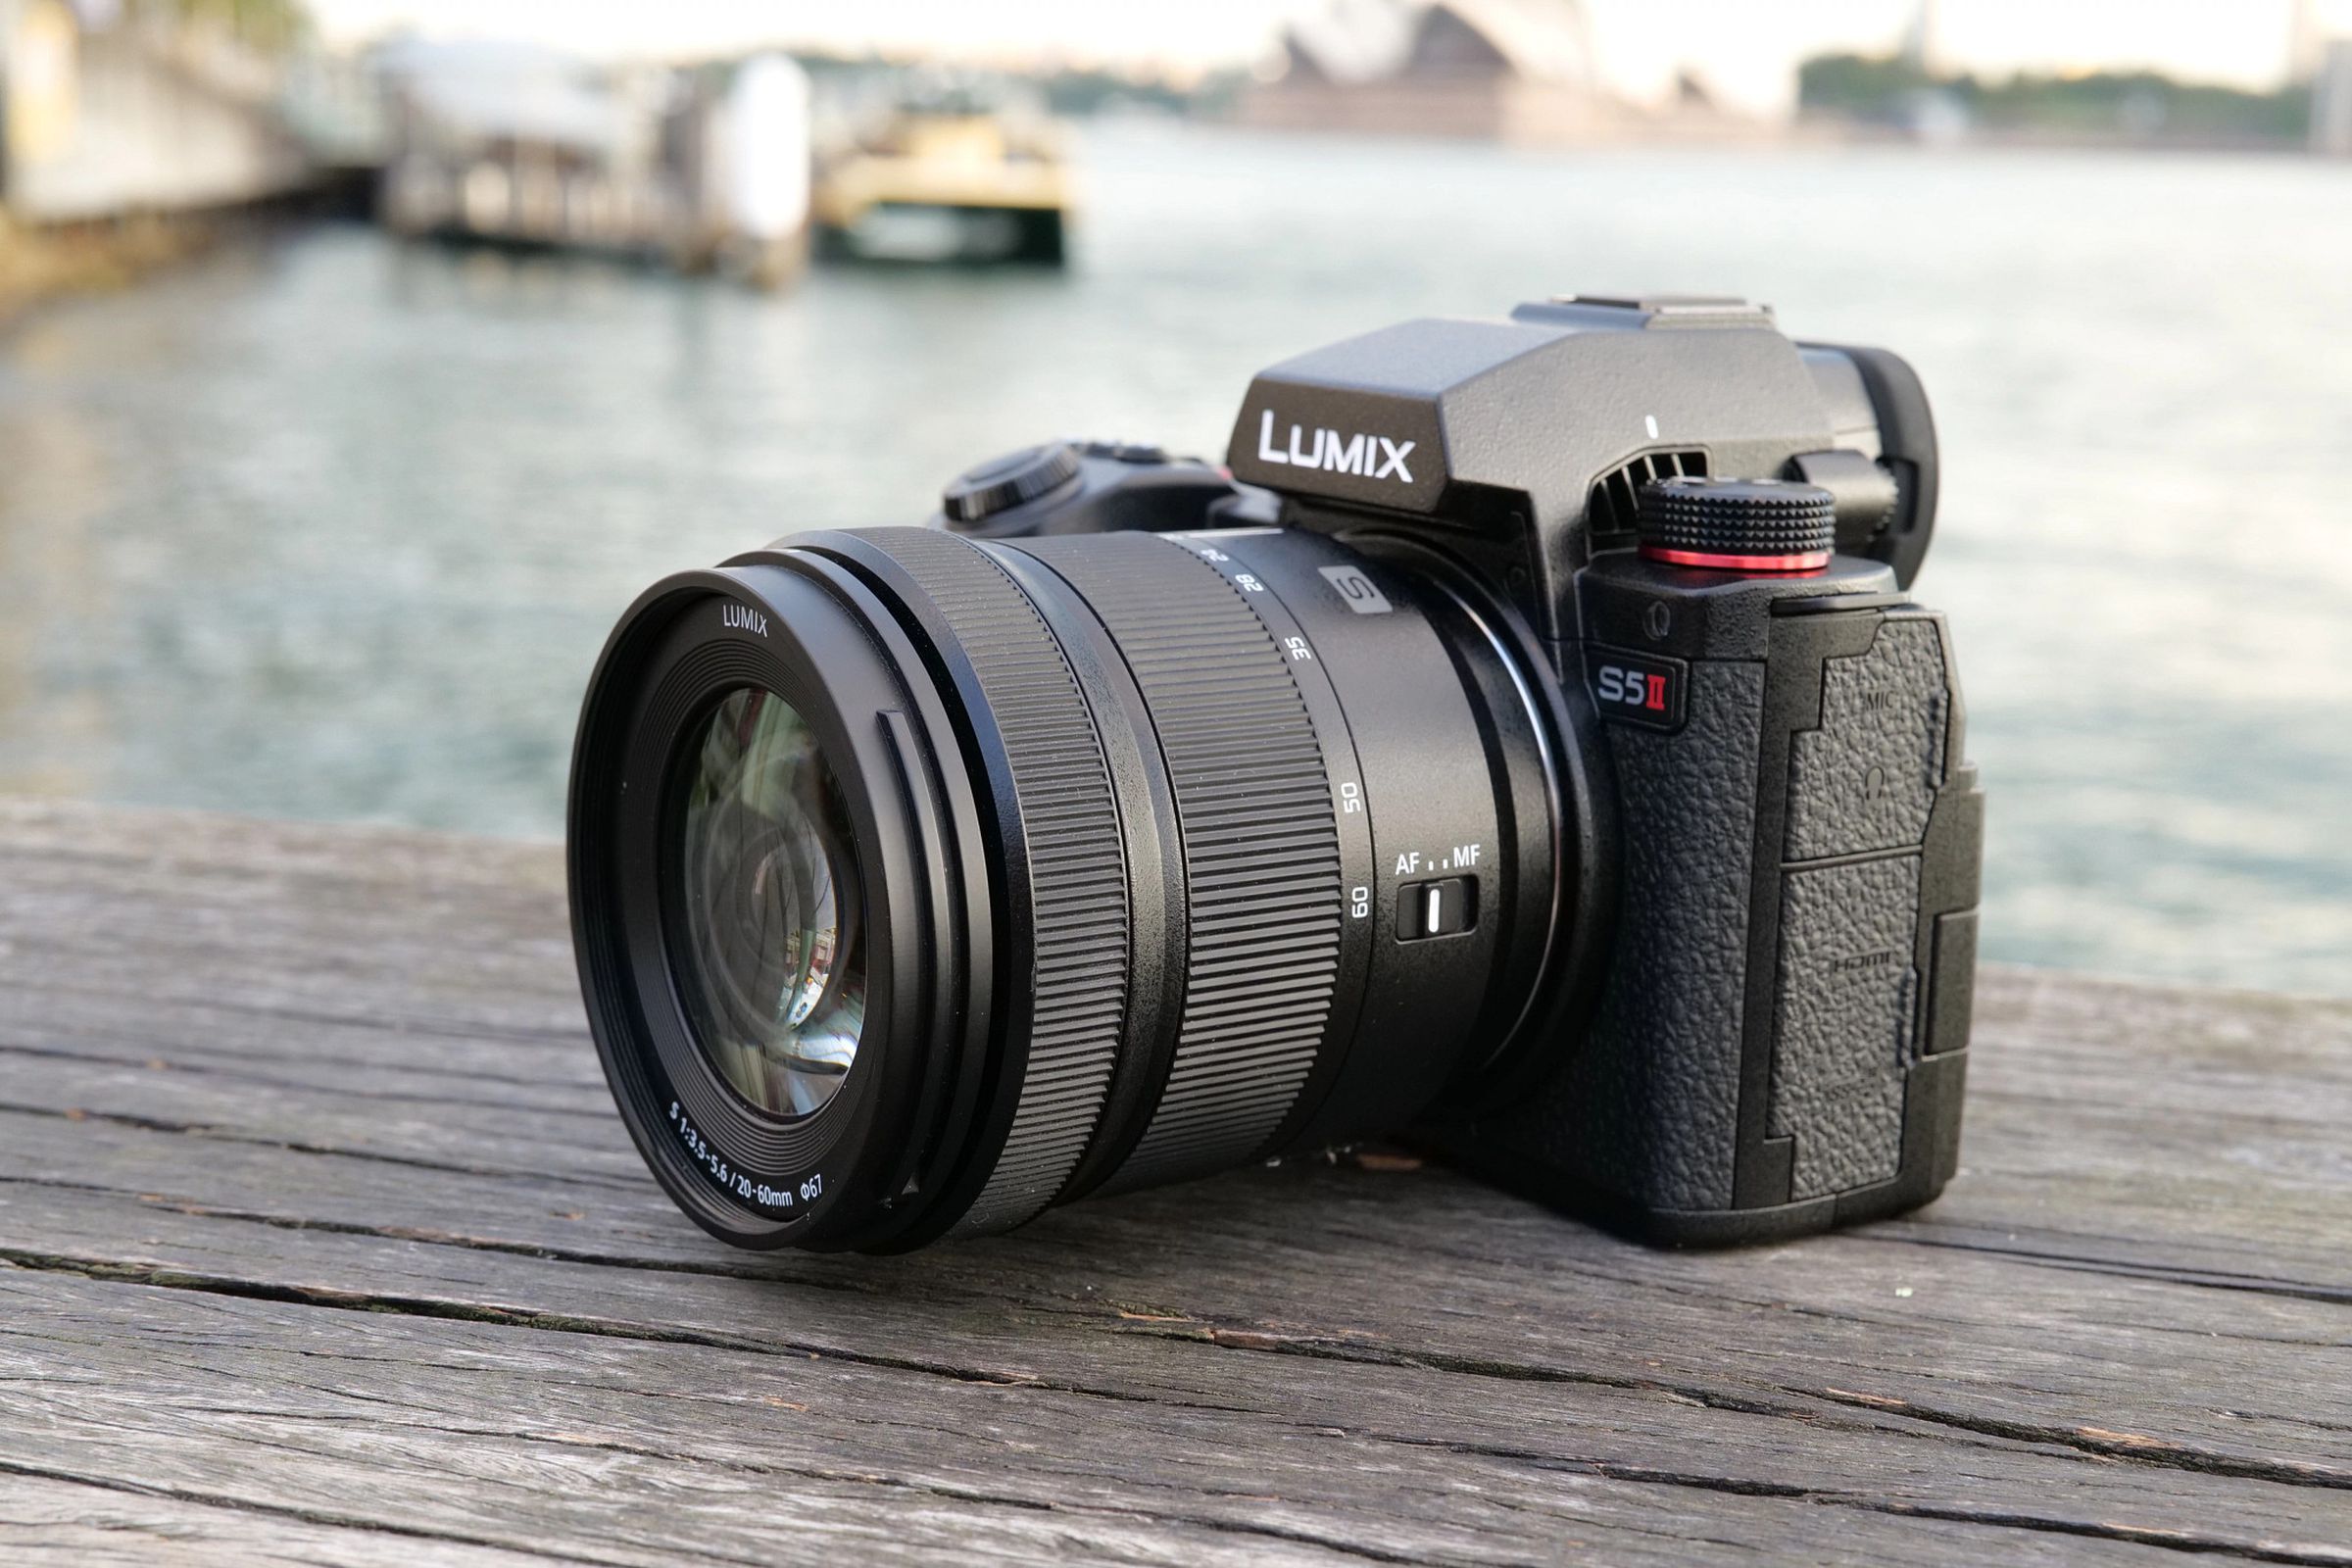 A three-quarter view of the Panasonic Lumix S5II camera, with lens attached, sitting on a wood dock in front of a body of water.